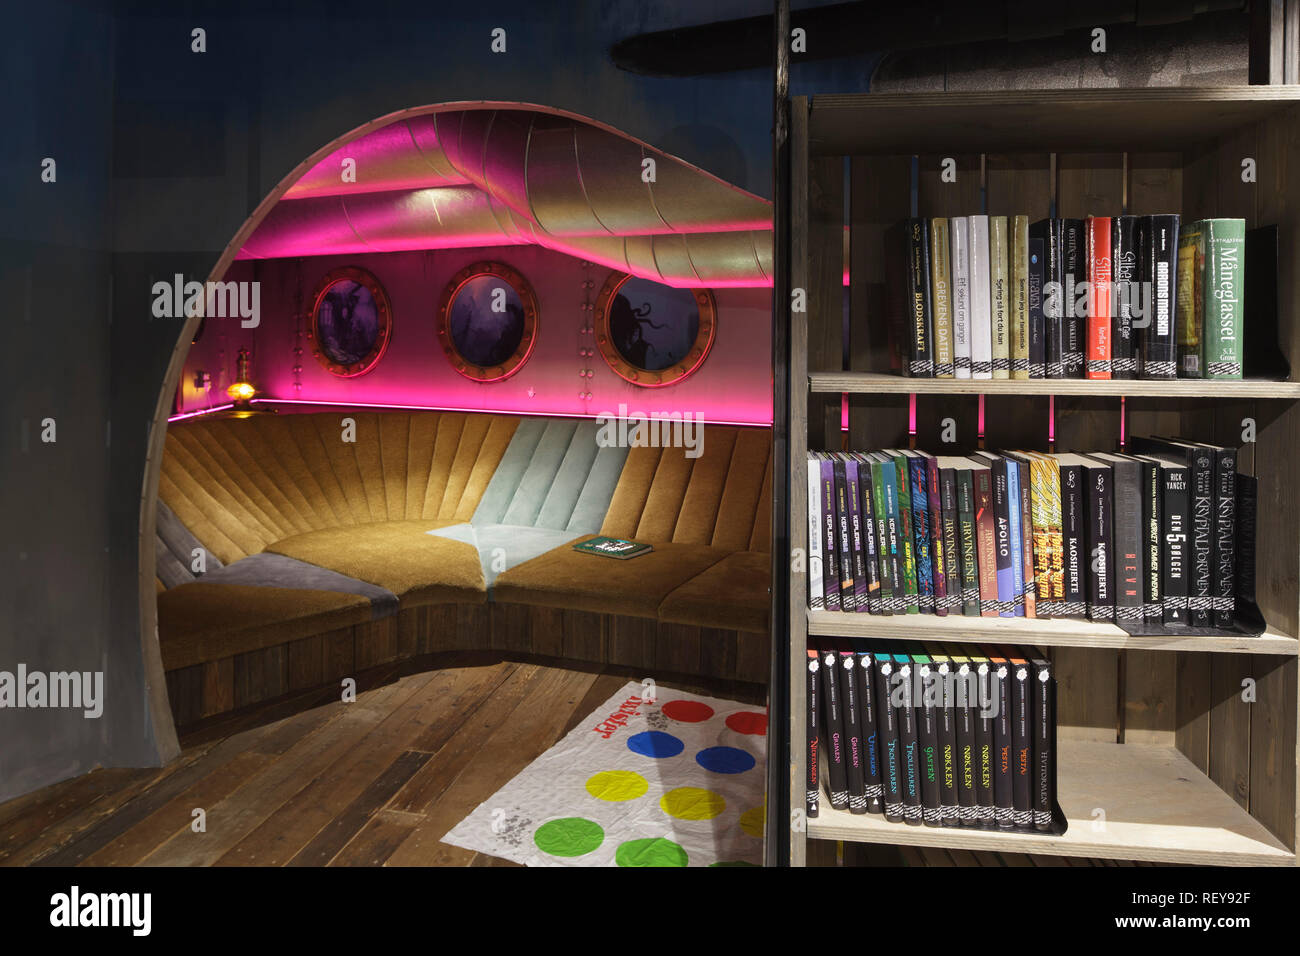 Submarine-themed seating area, with overhead portholes and pink lighting and bookshelf to right. Deichman Biblo Toyen Children's Library, Oslo, Norway Stock Photo